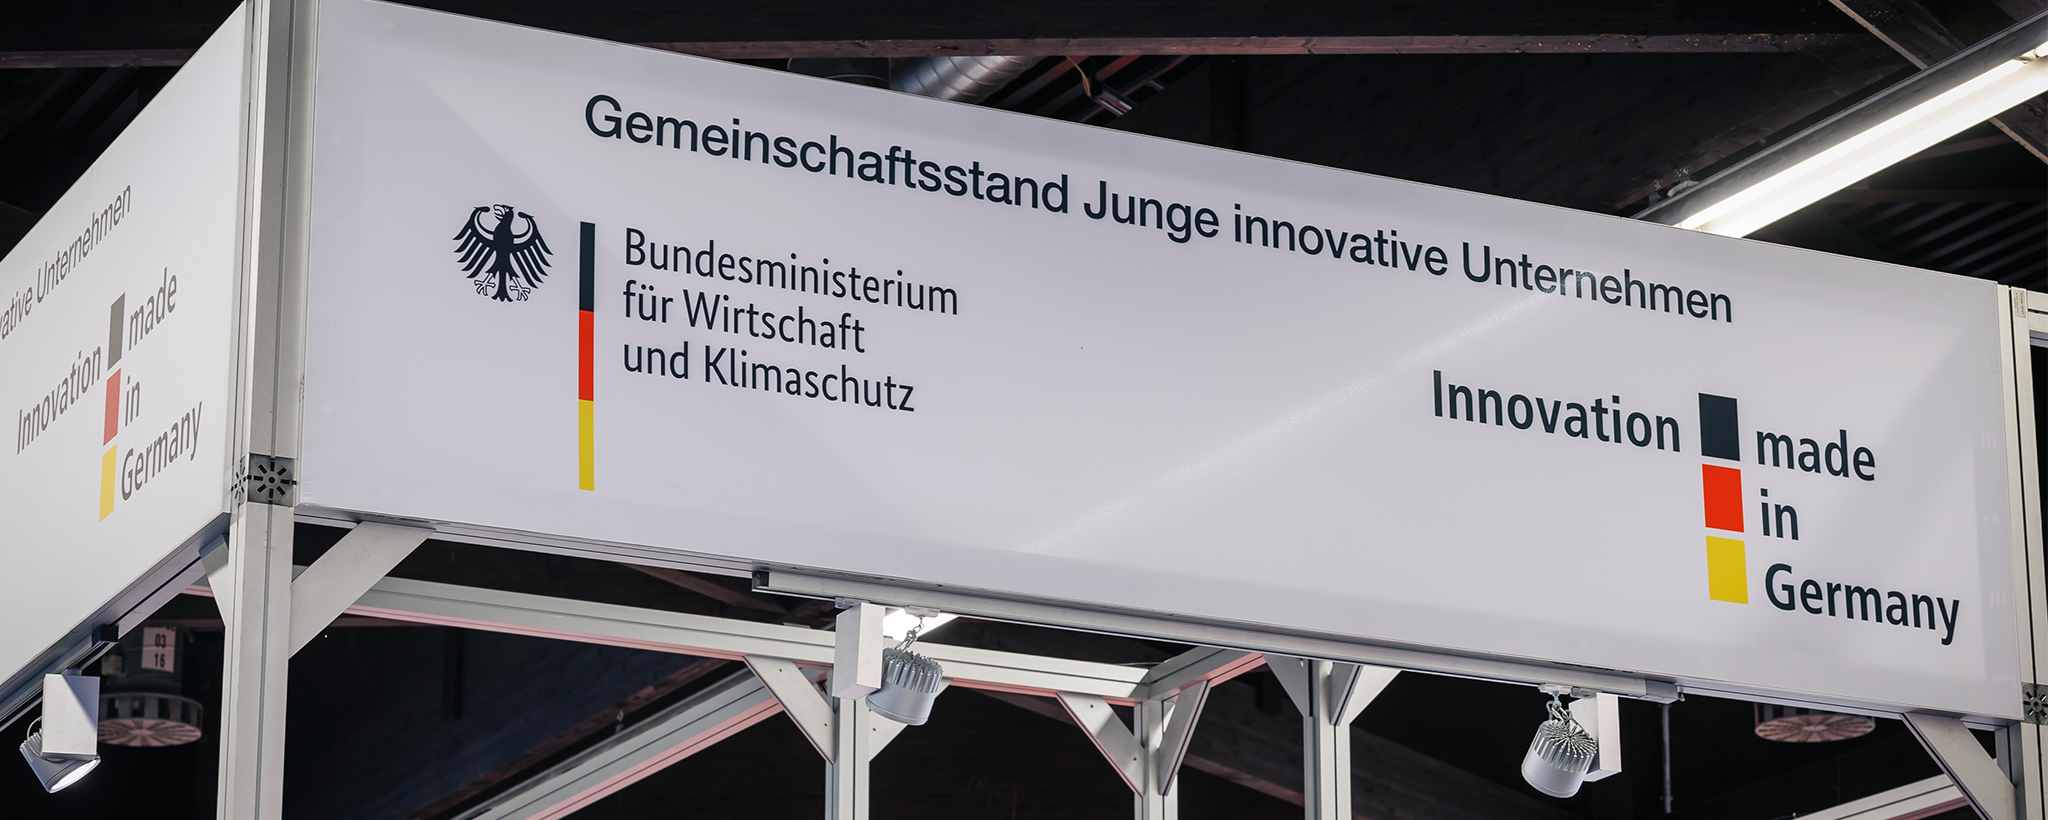 BMWK pavilions for young innovative companies